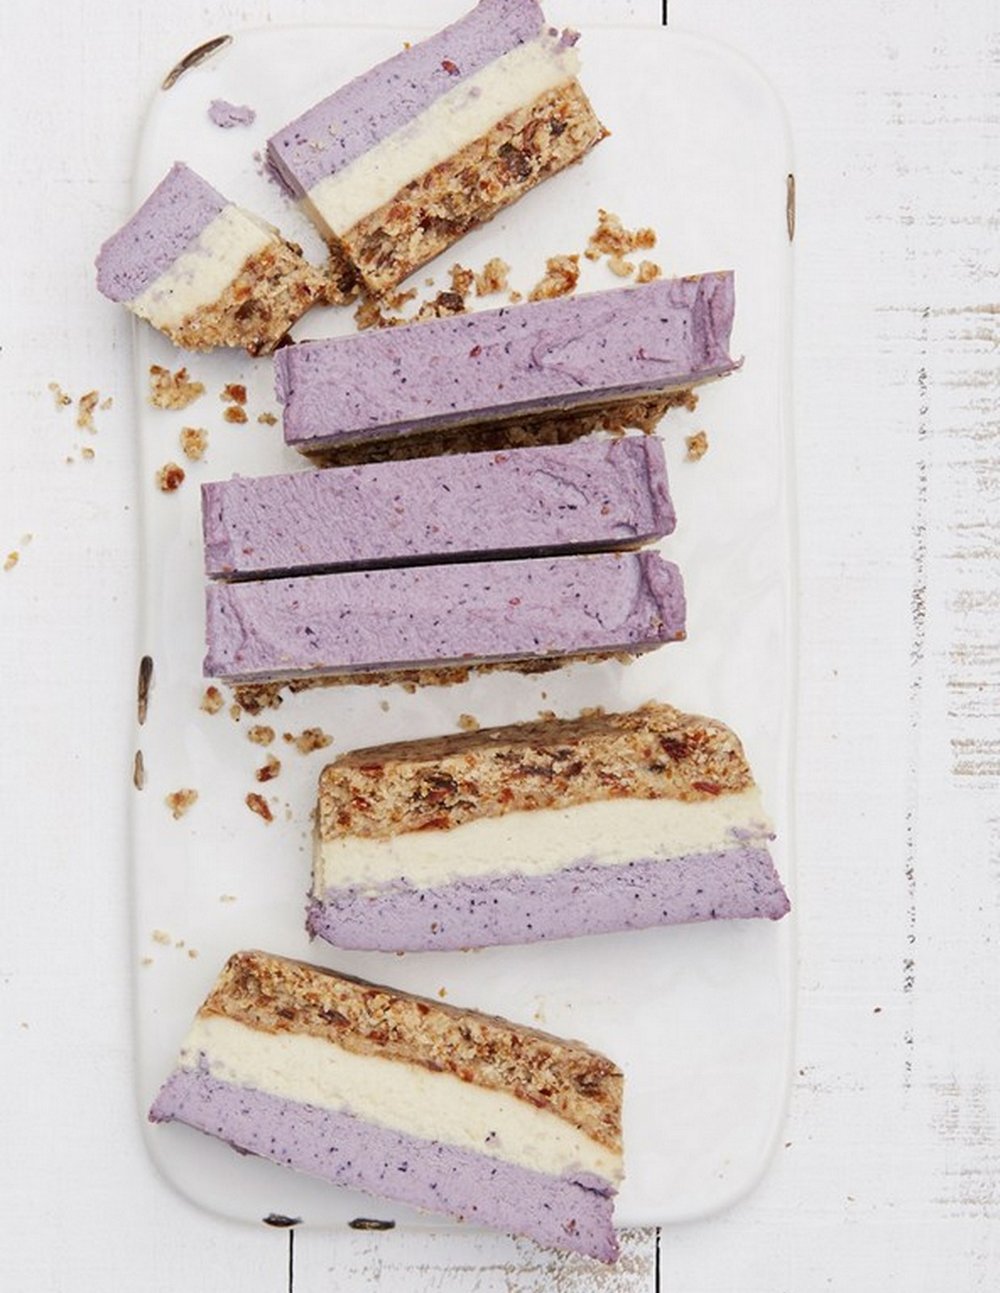 RAW BLUEBERRY AND CASHEW COCONUT BARS